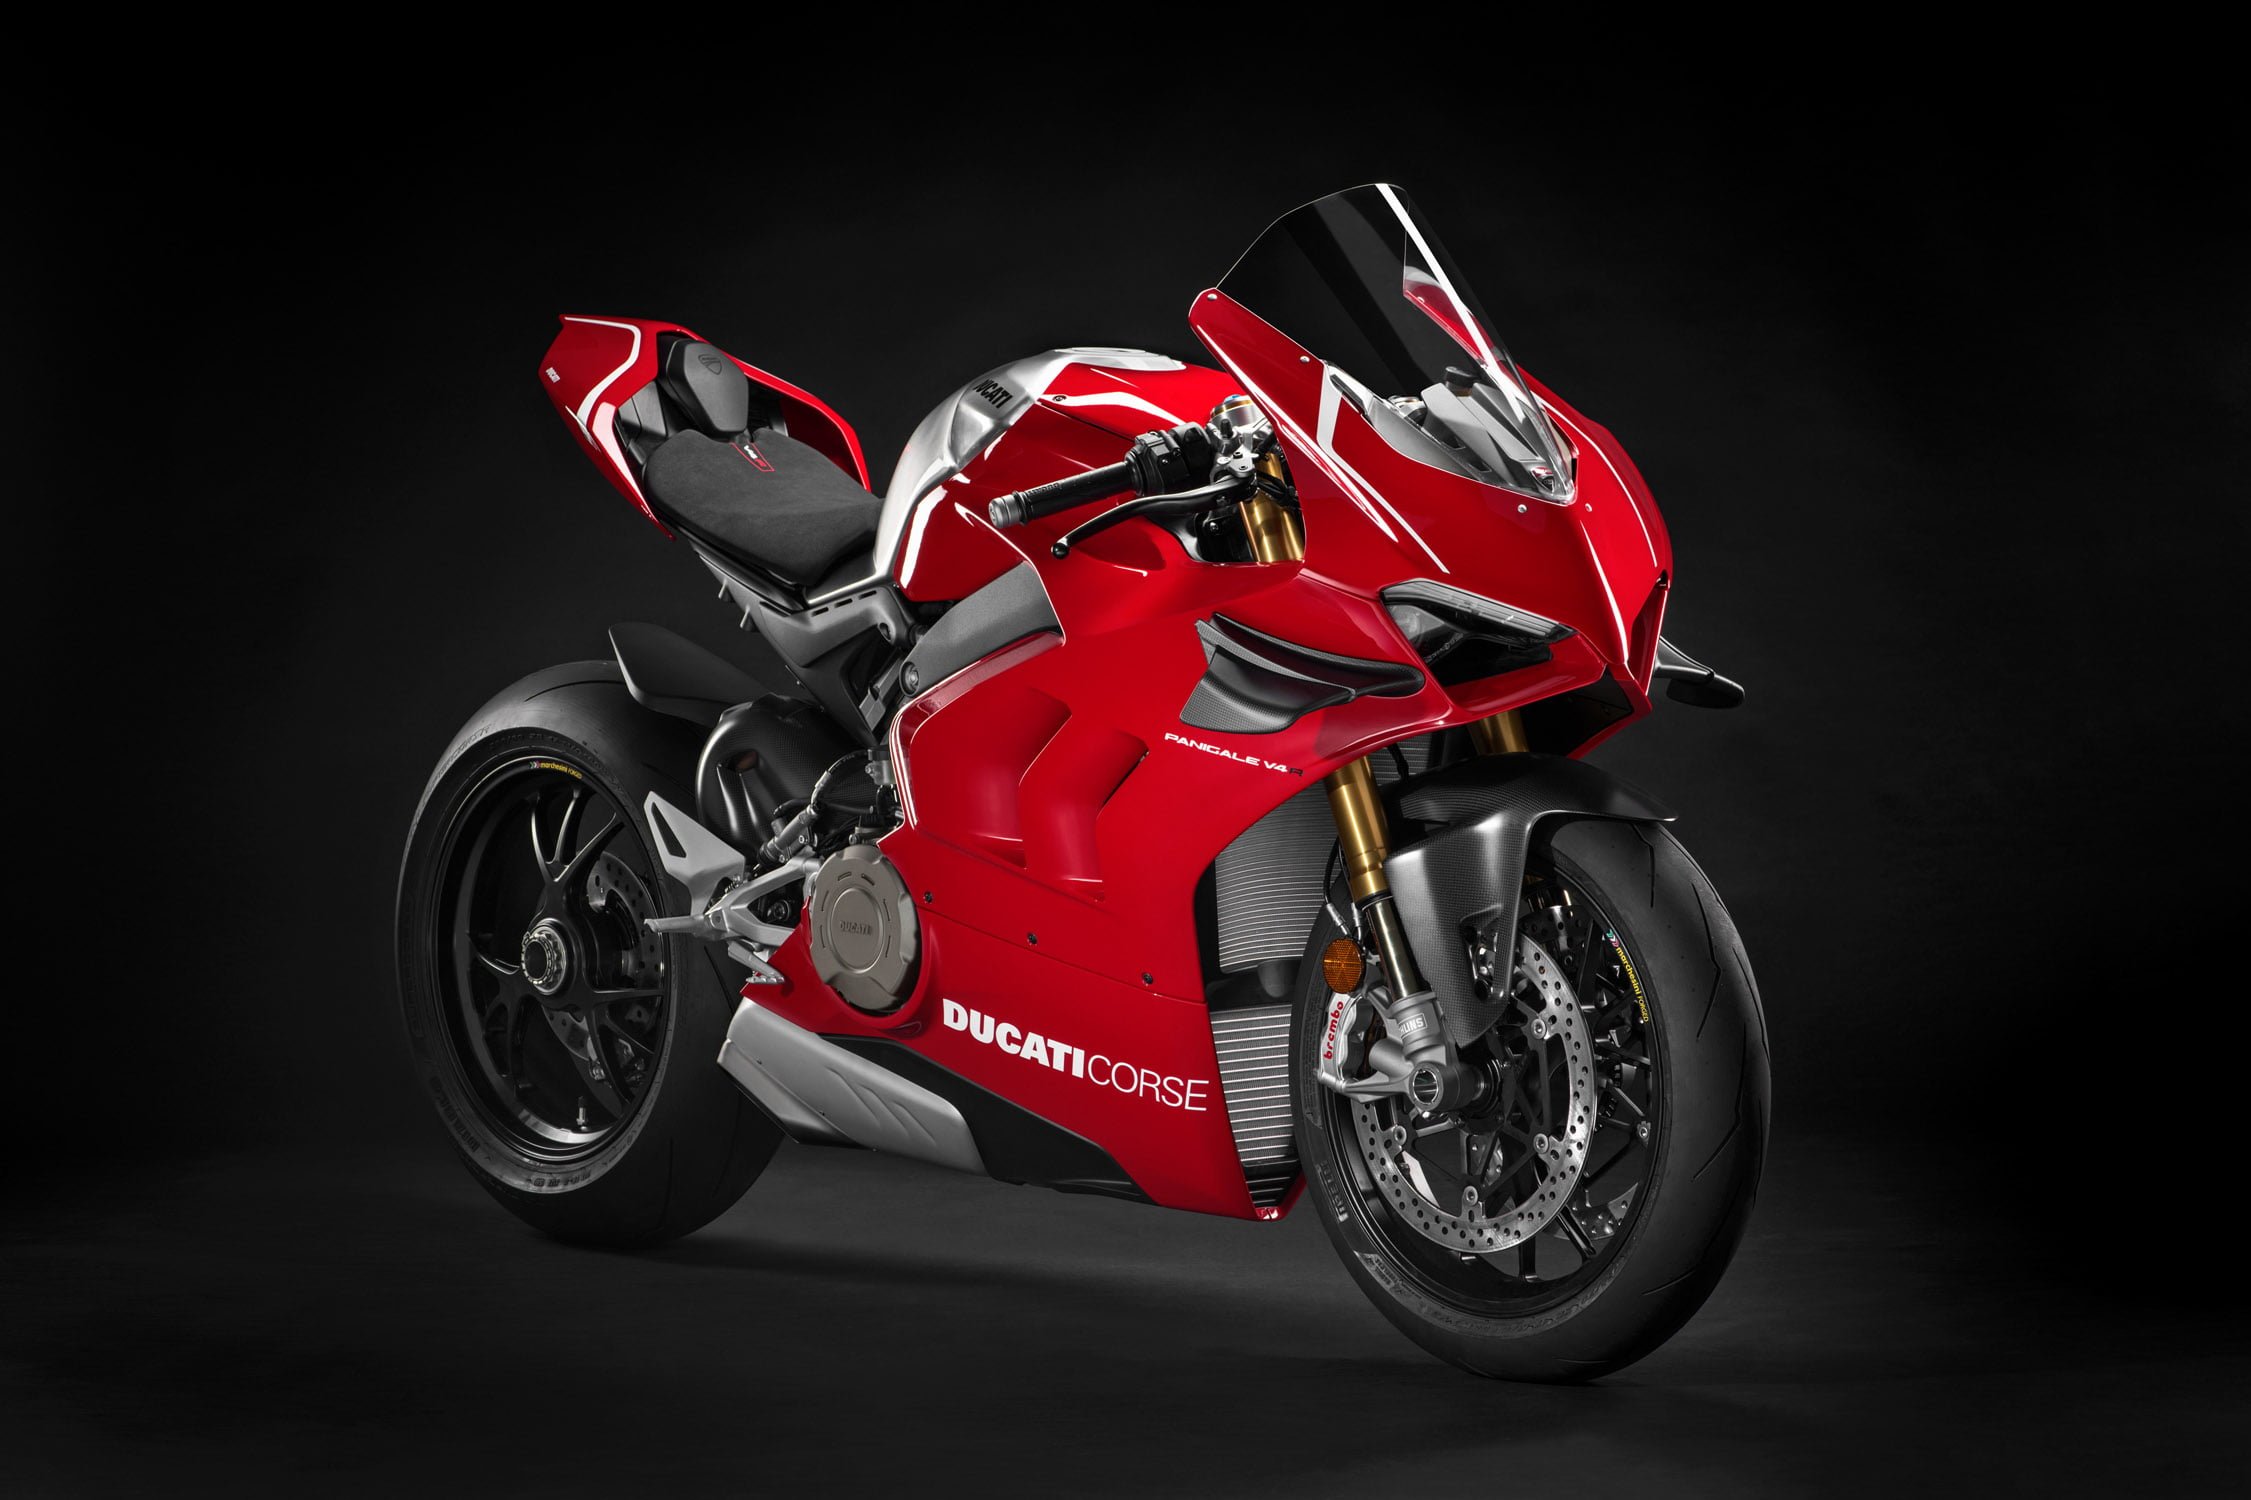 Ducati Panigale V4 R Launched in India: prices at INR 51.87 lakh